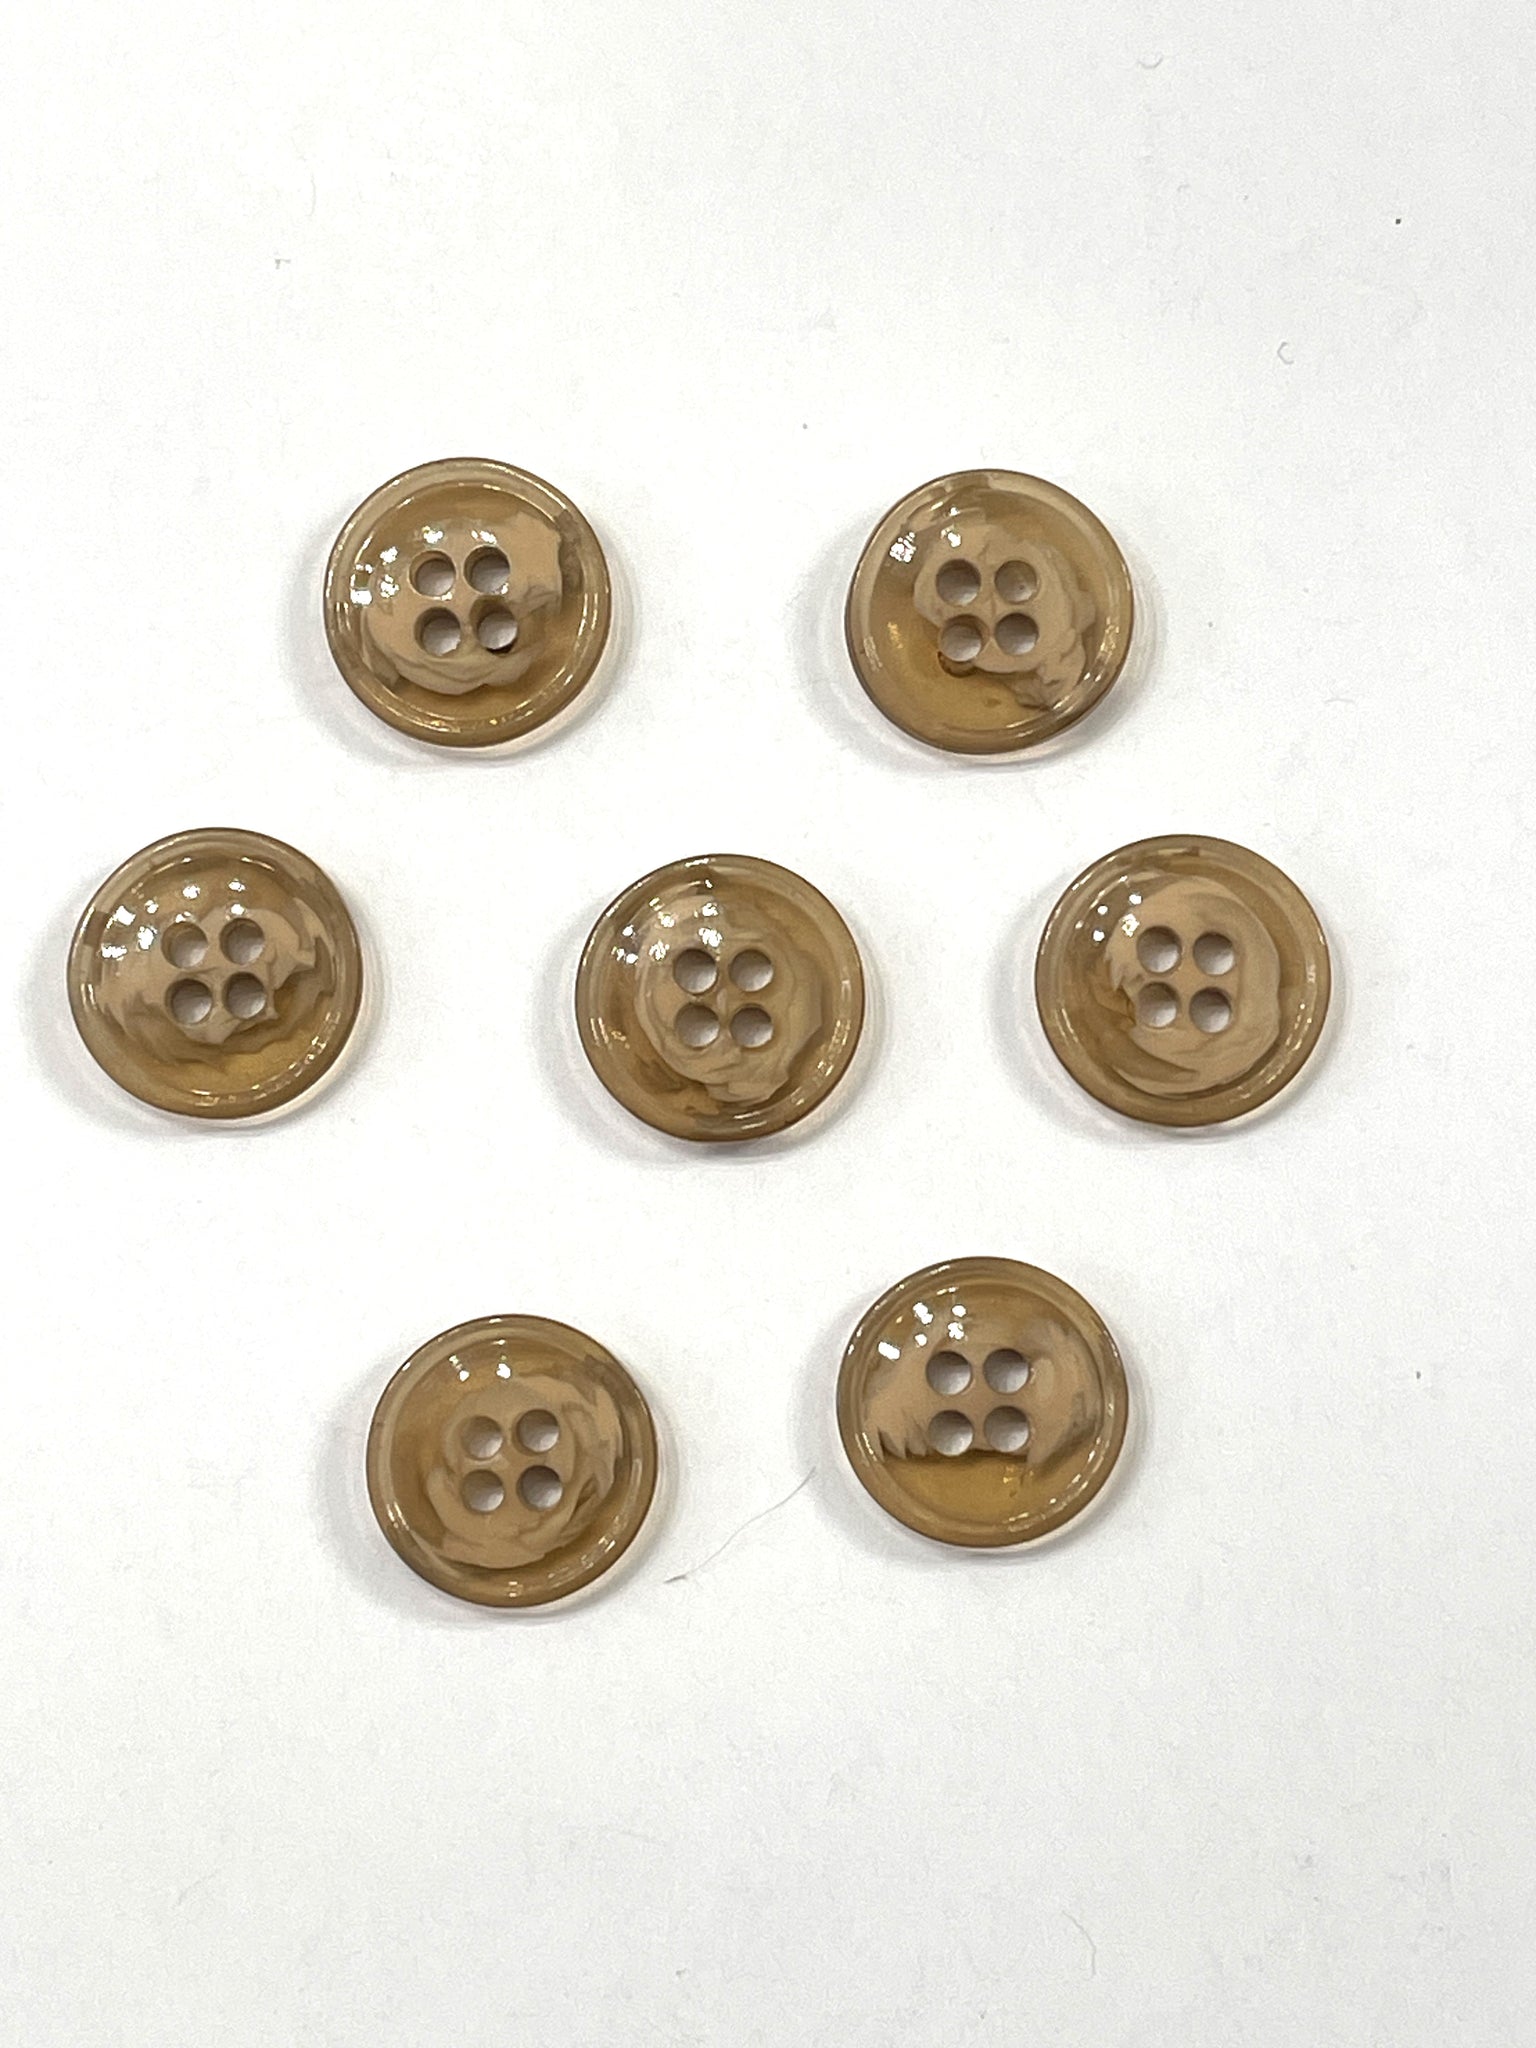 Buttons 4 Hole Plastic Set of 7 - Marbled Clear and Opaque Beige